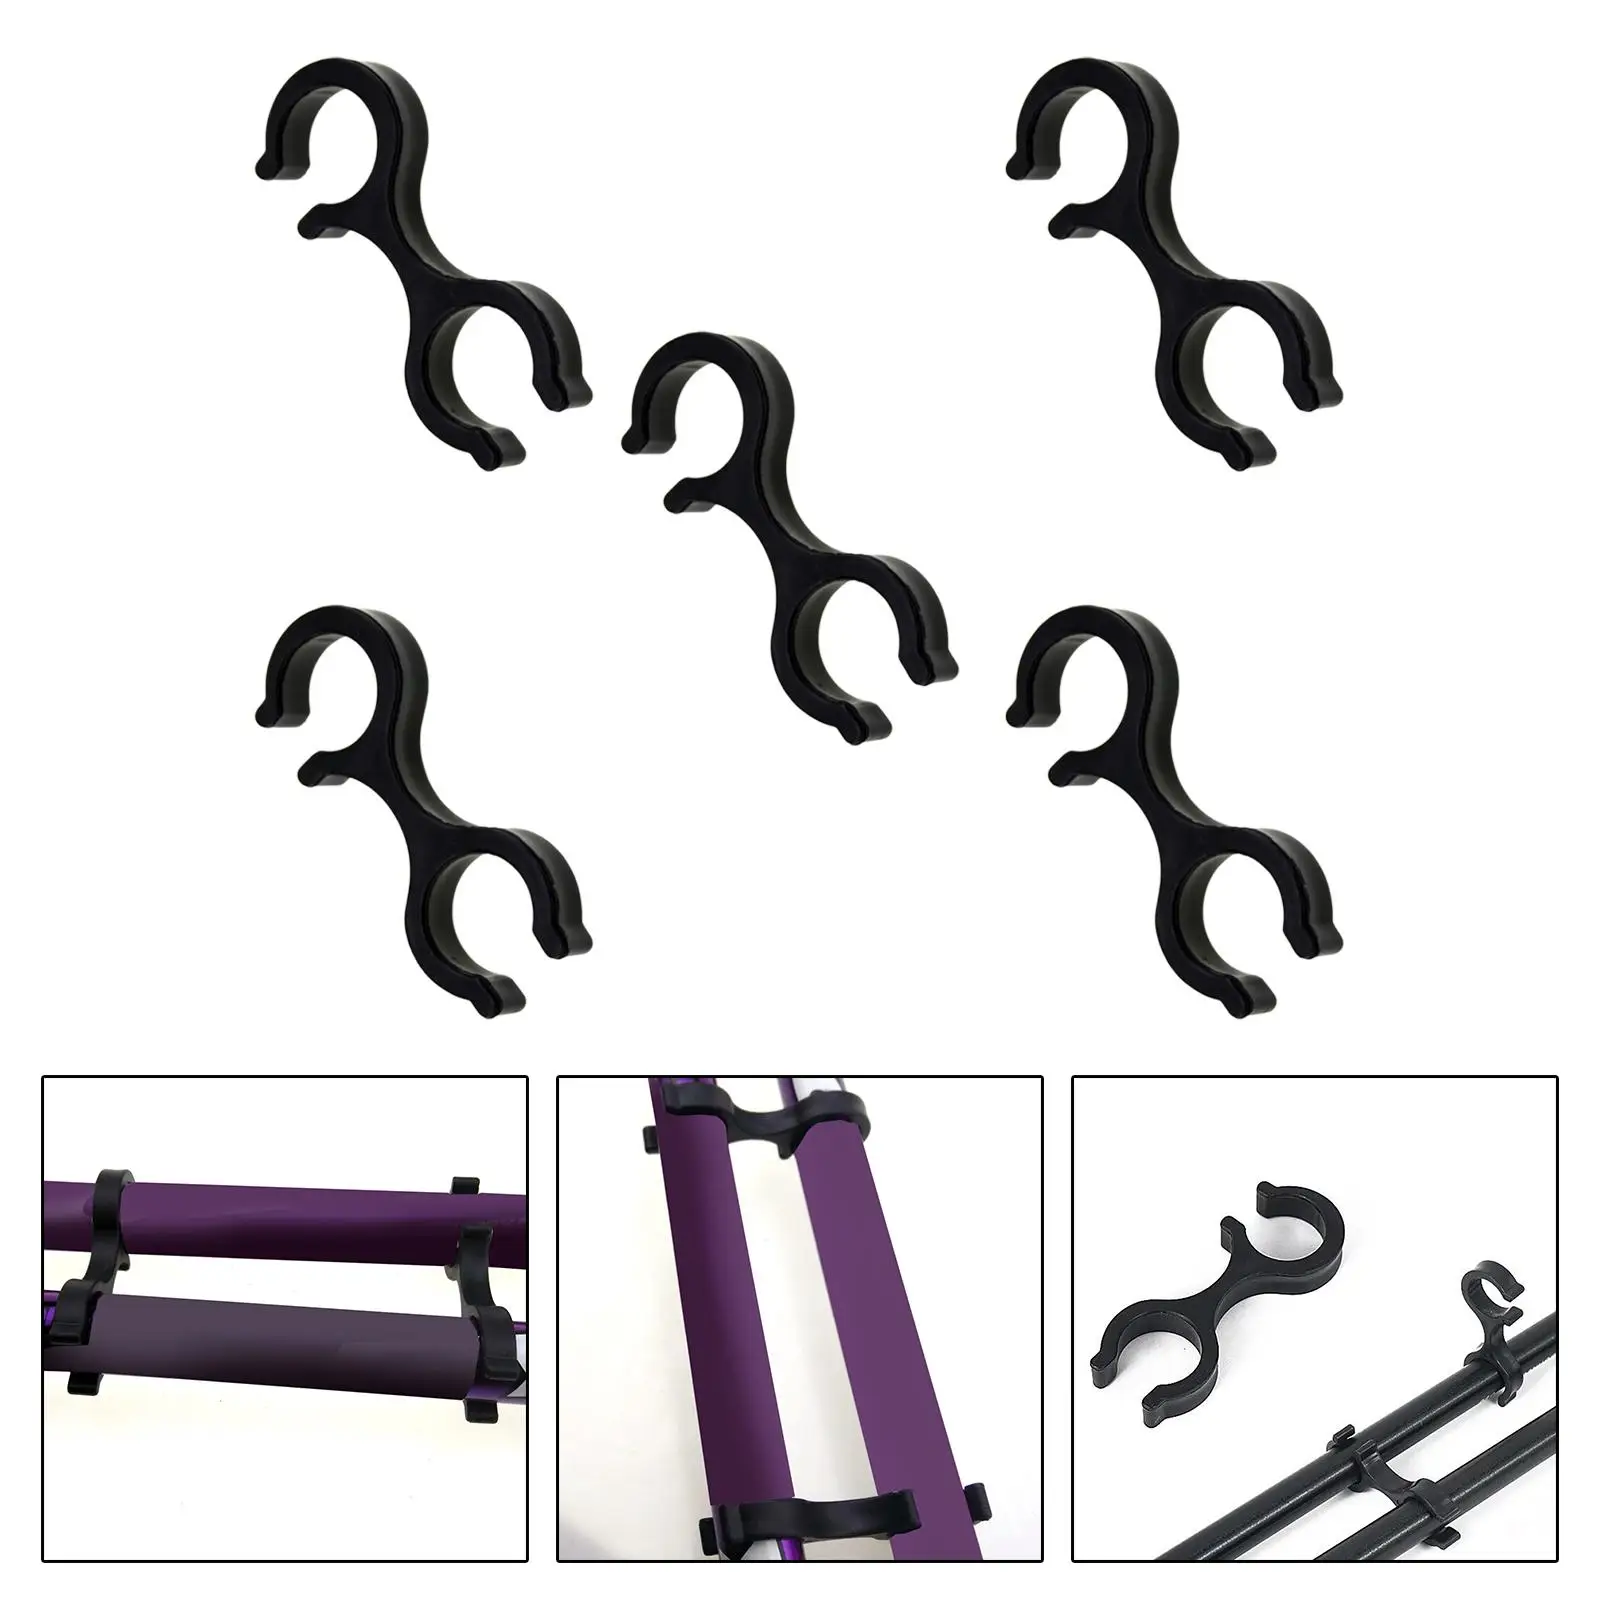 Trekking Pole Clips Universal Repair Spare Parts Replacement Parts 5 Packs Accs for Climbing Rod Climbing Crutch Hiking Poles